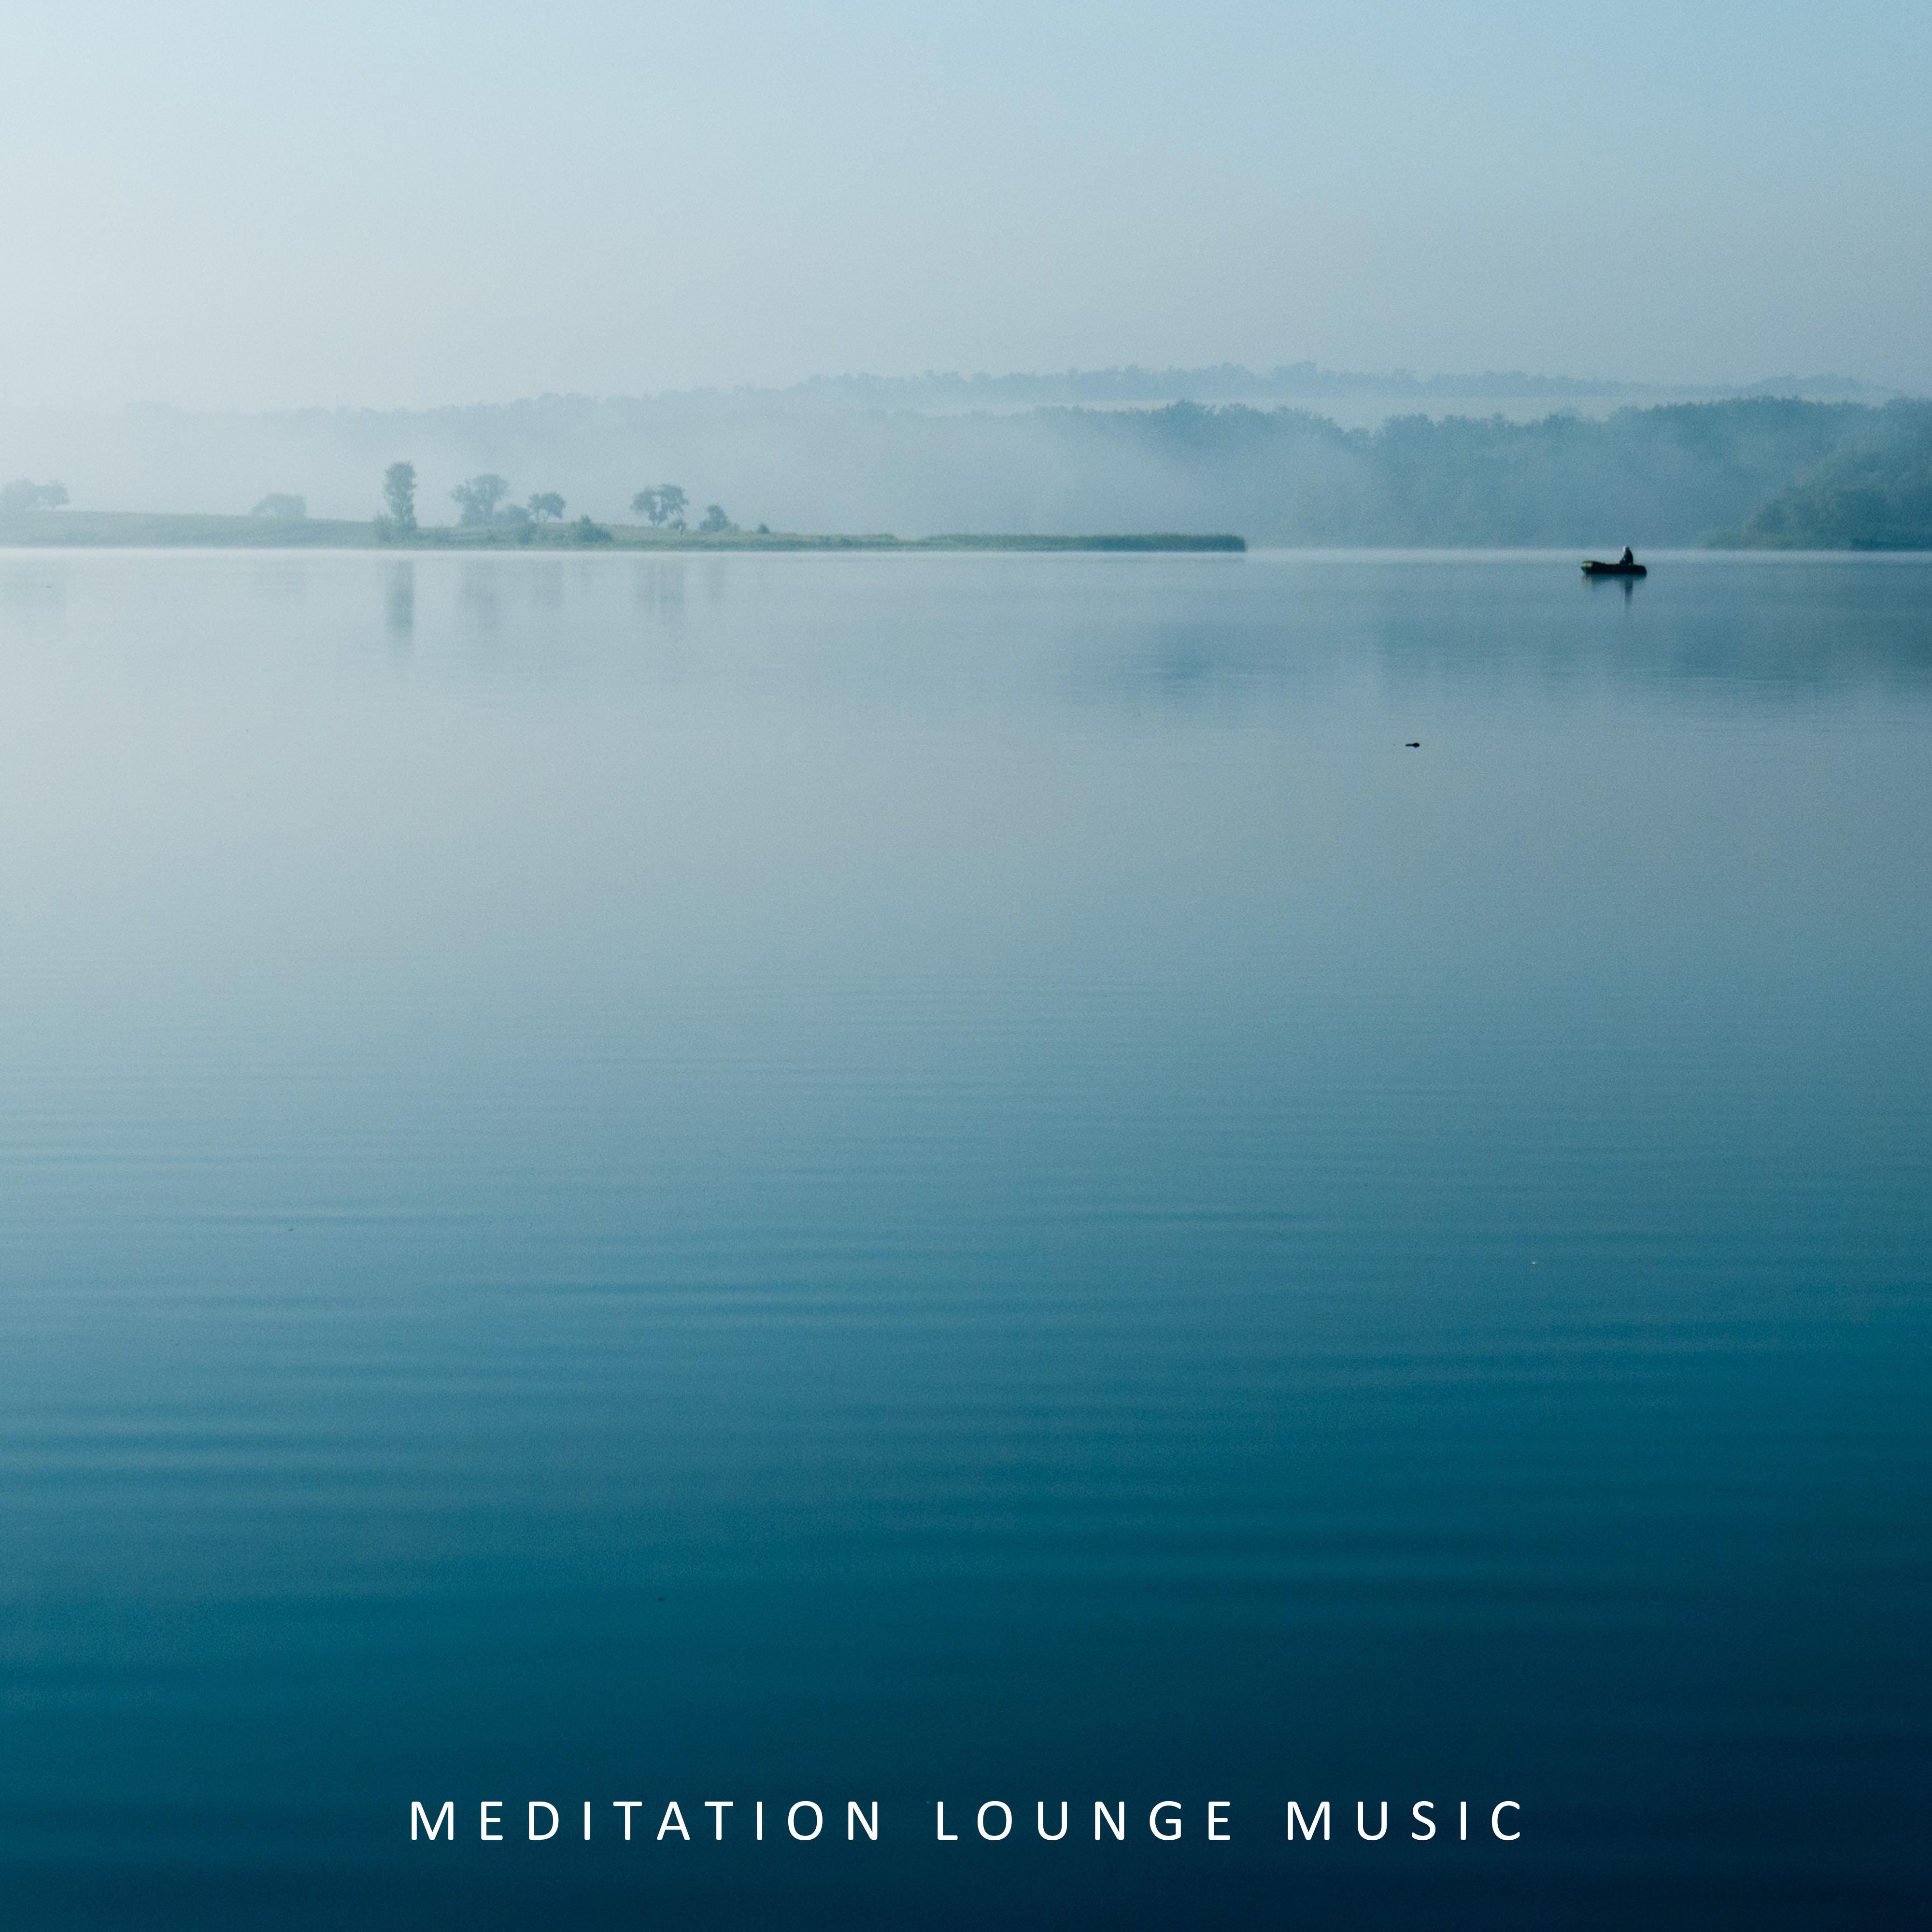 Meditation Lounge Music: Compilation of 2019 New Age Music for Deeper Relaxation & Yoga, Improve Body & Soul Balance, Chakra Opening & Healing, Inner Bliss